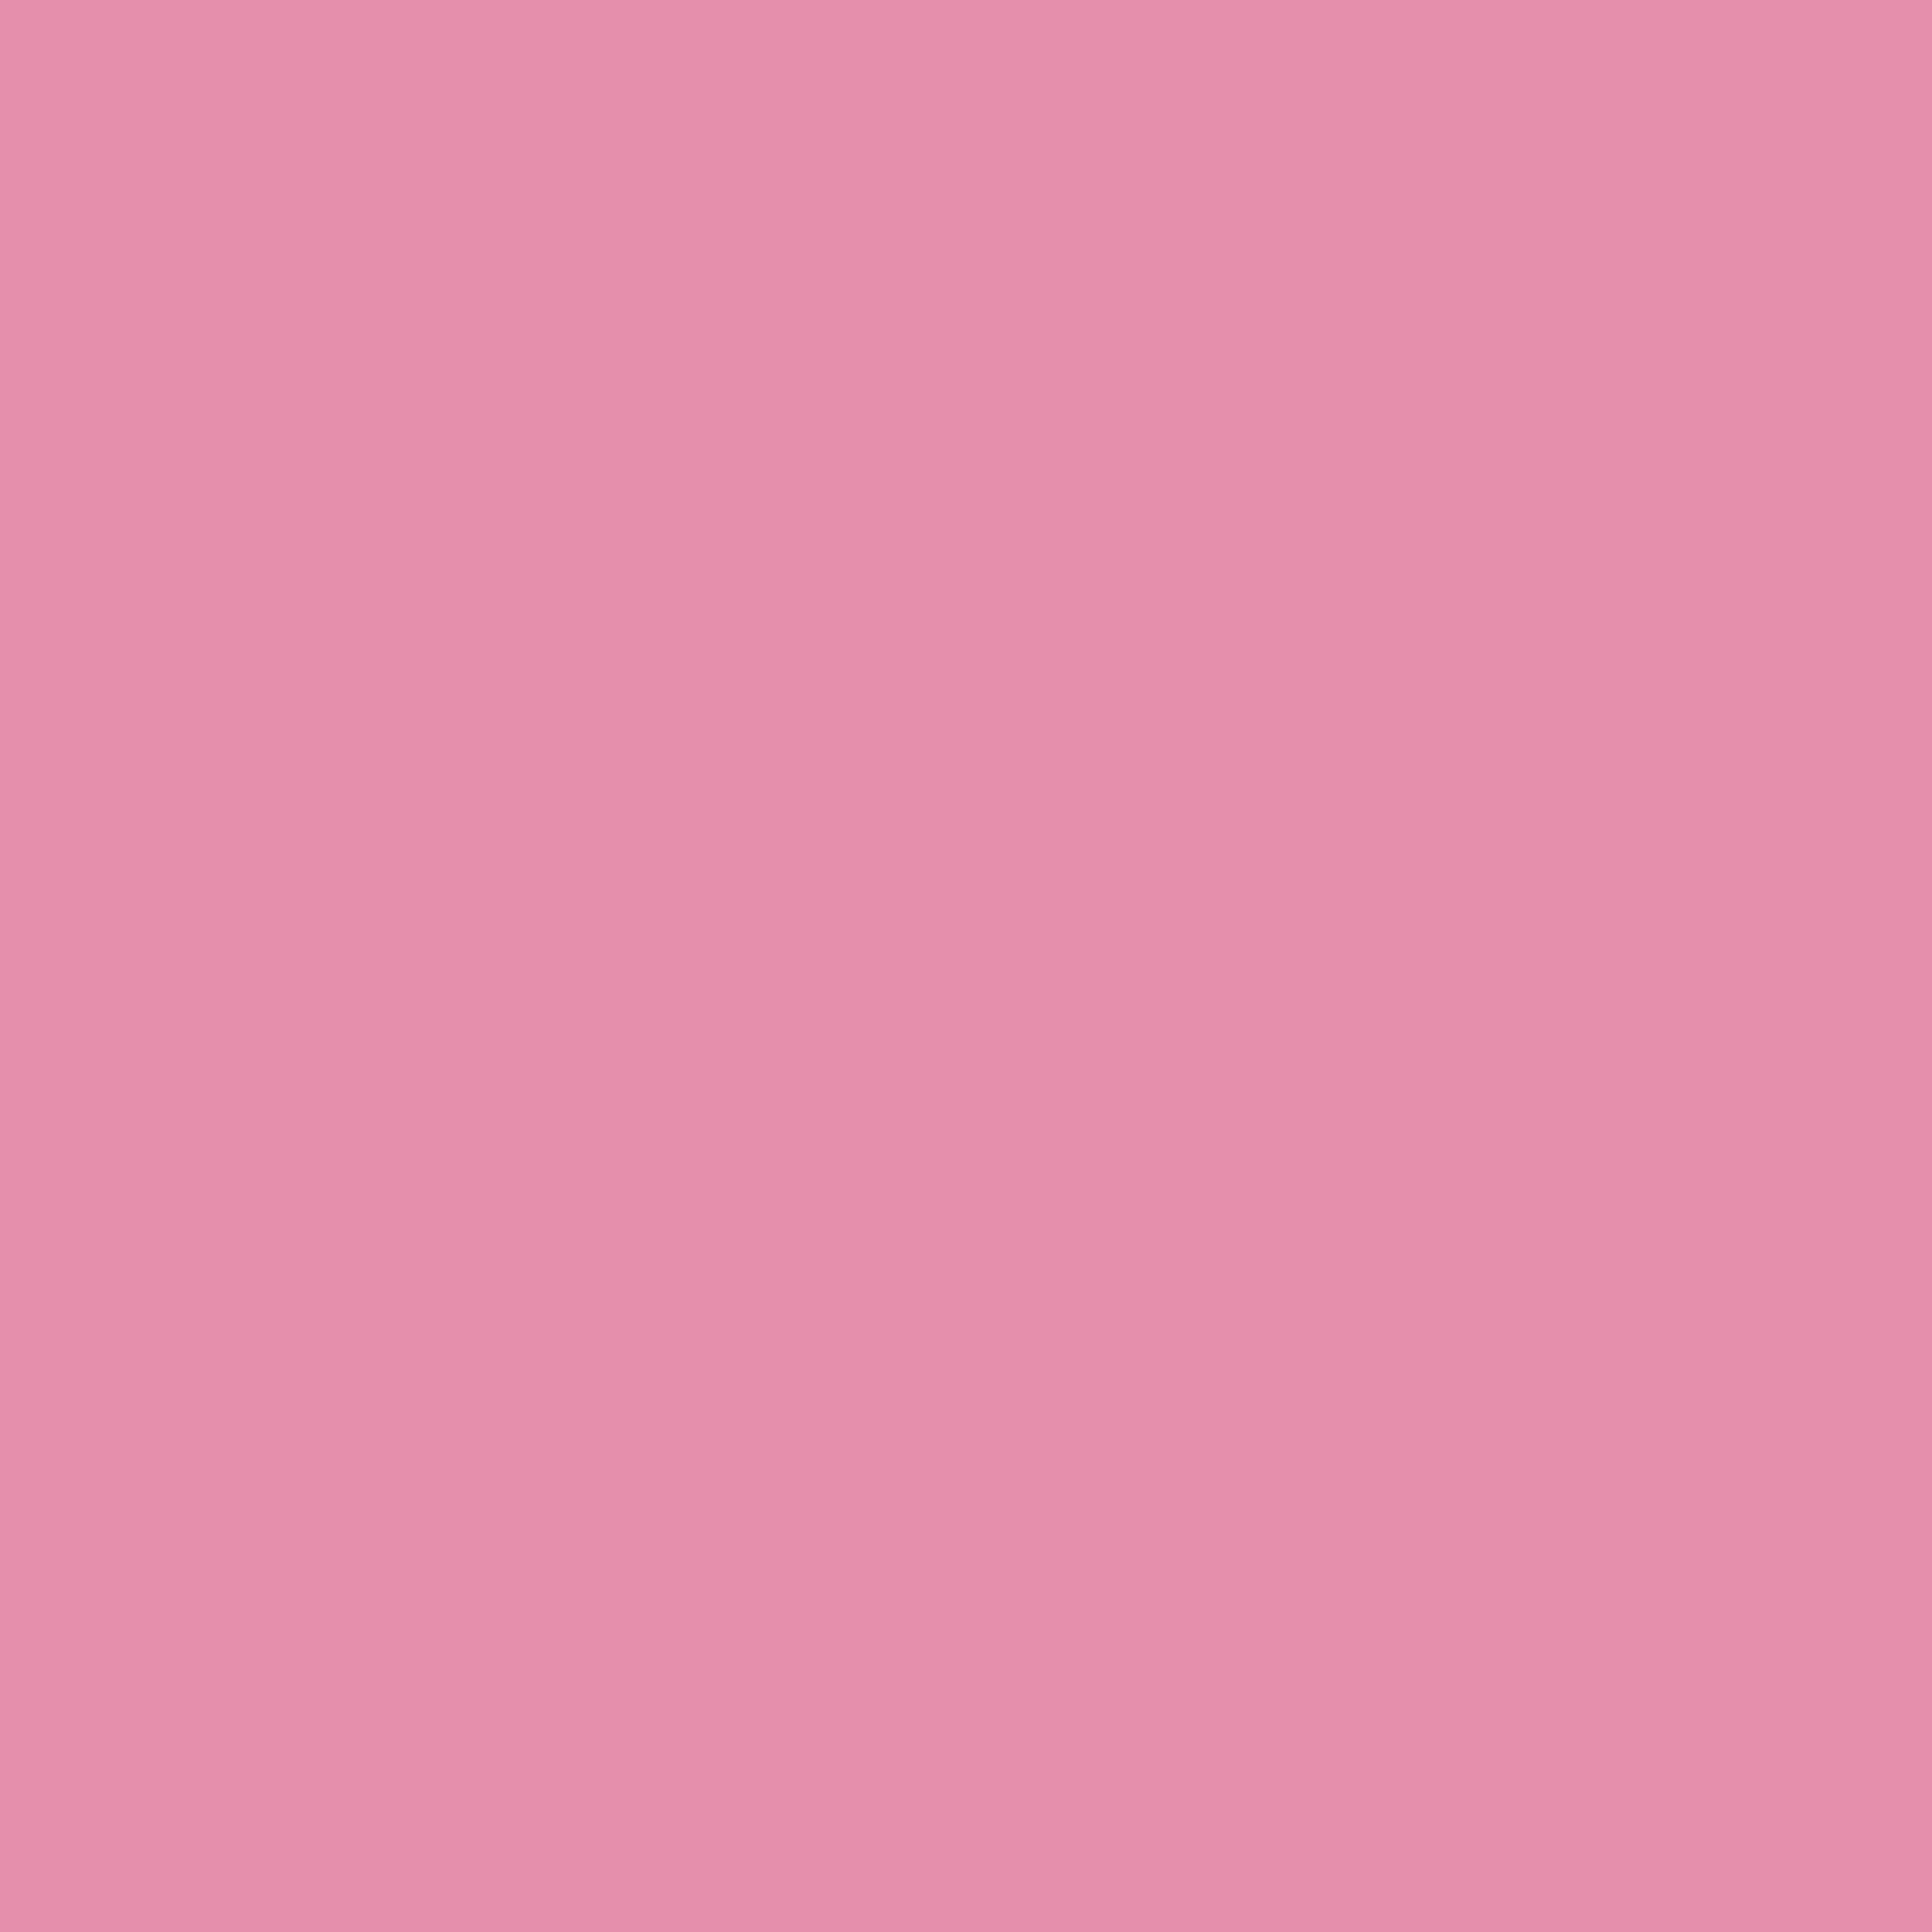 2732x2732 Light Thulian Pink Solid Color Background